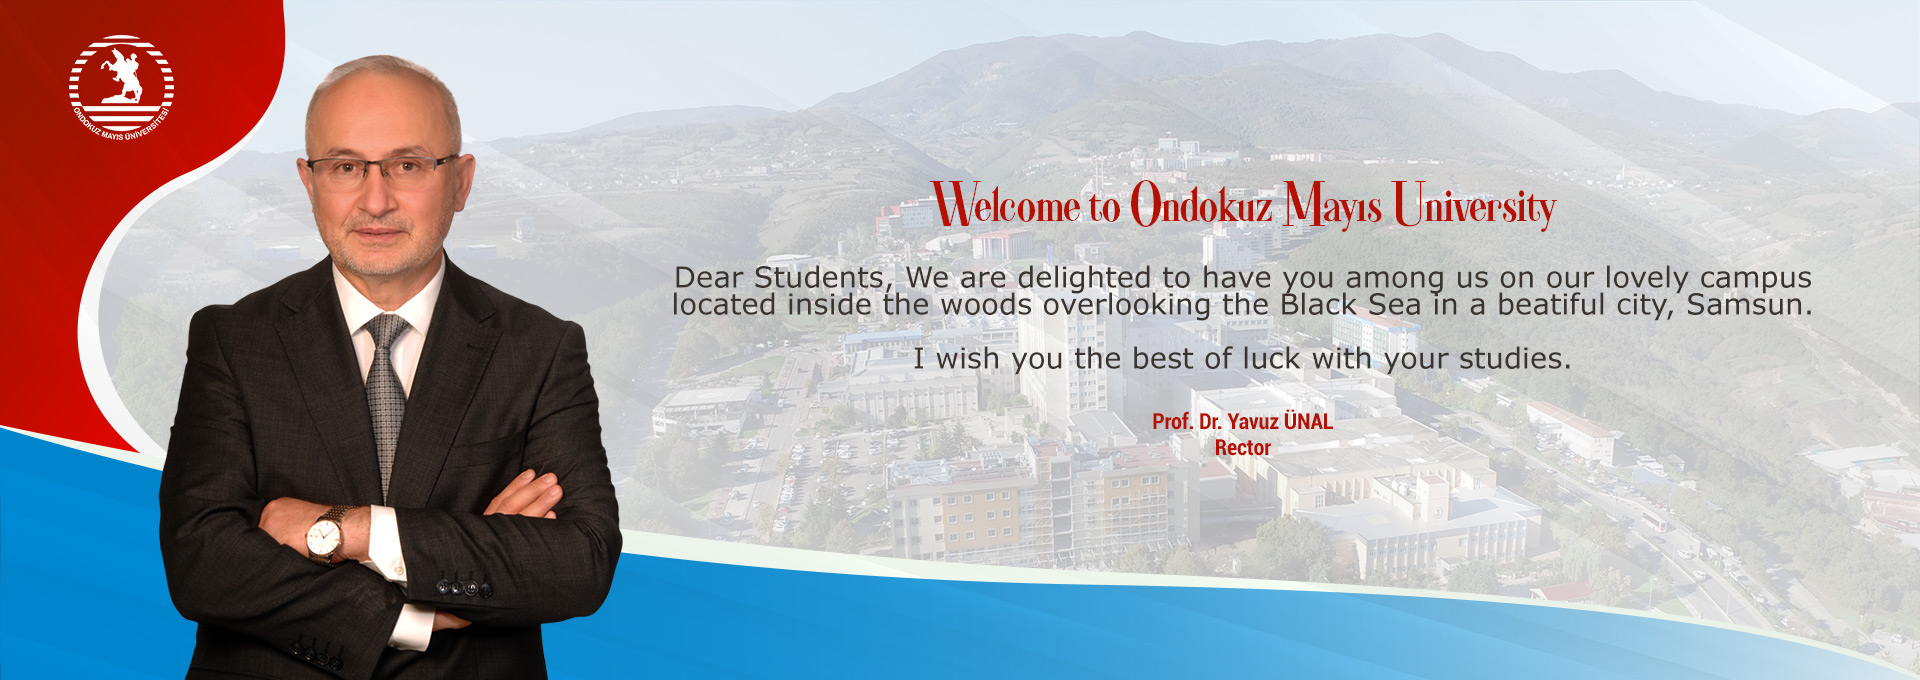 Rector’s Welcome Message  